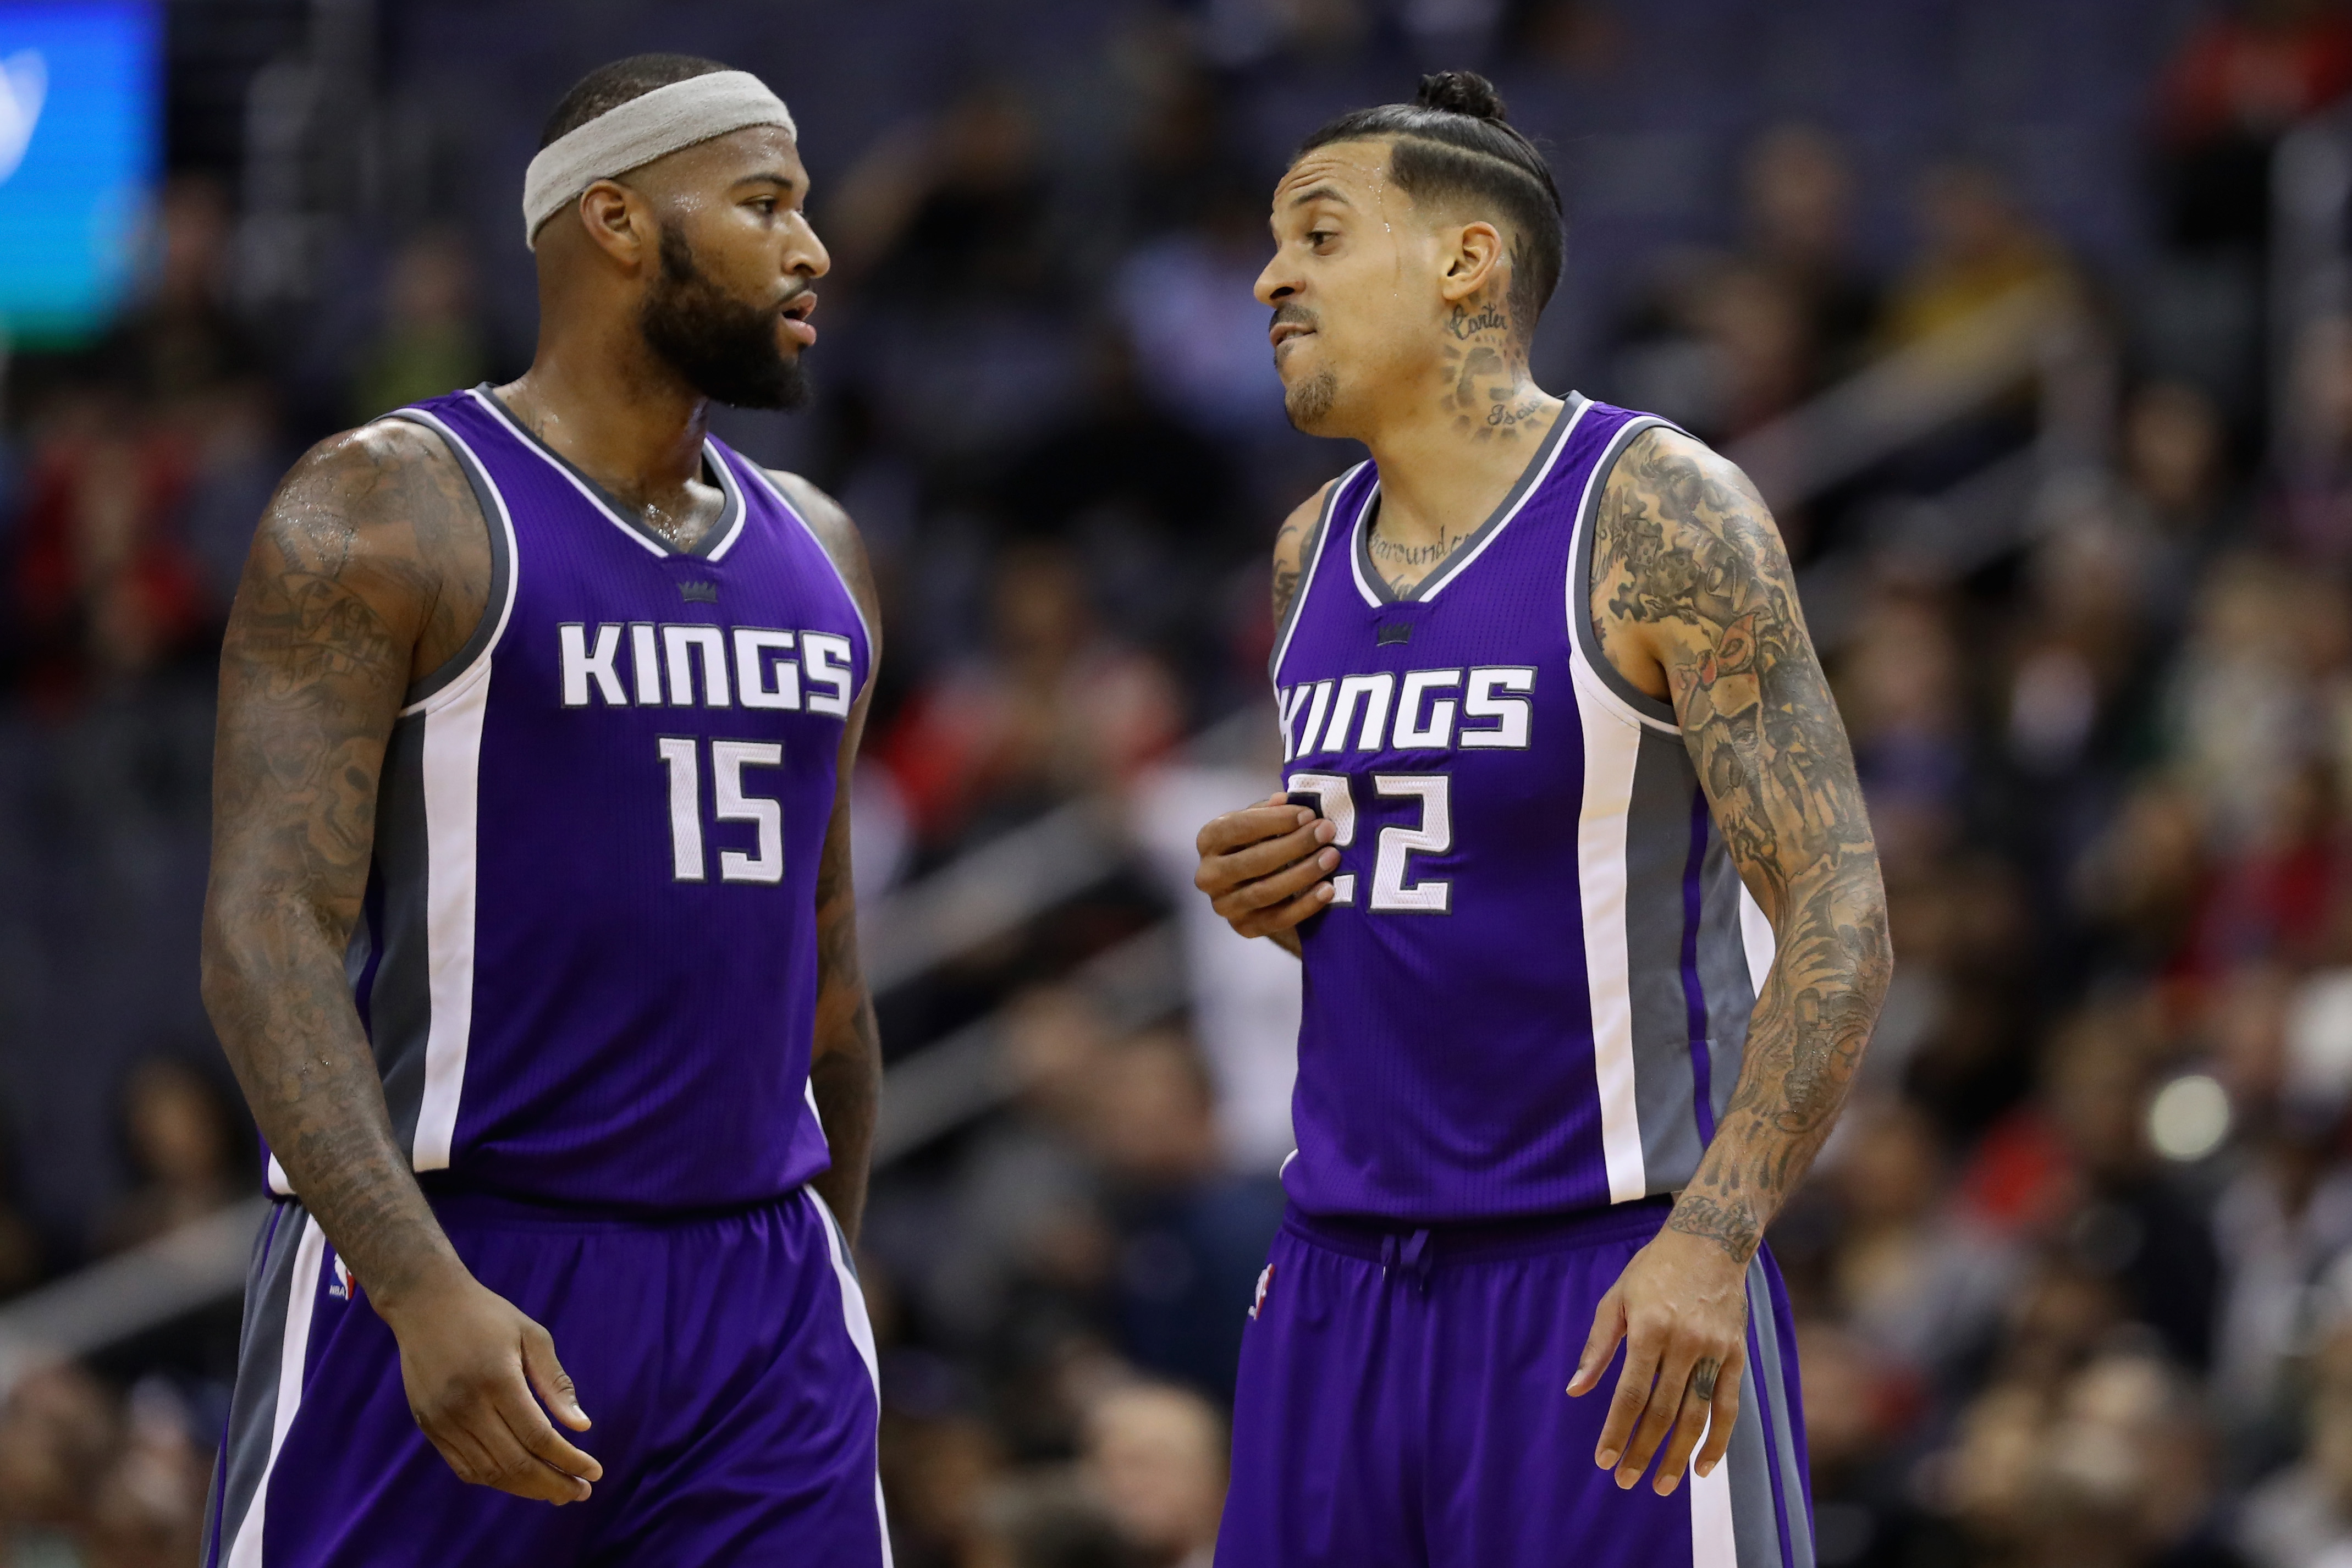 WASHINGTON, DC - NOVEMBER 28: DeMarcus Cousins #15 and Matt Barnes #22 of the Sacramento Kings talk on the floor against the Washington Wizards at Verizon Center on November 28, 2016 in Washington, DC. NOTE TO USER: User expressly acknowledges and agrees that, by downloading and or using this photograph, User is consenting to the terms and conditions of the Getty Images License Agreement.   Rob Carr/Getty Images/AFP